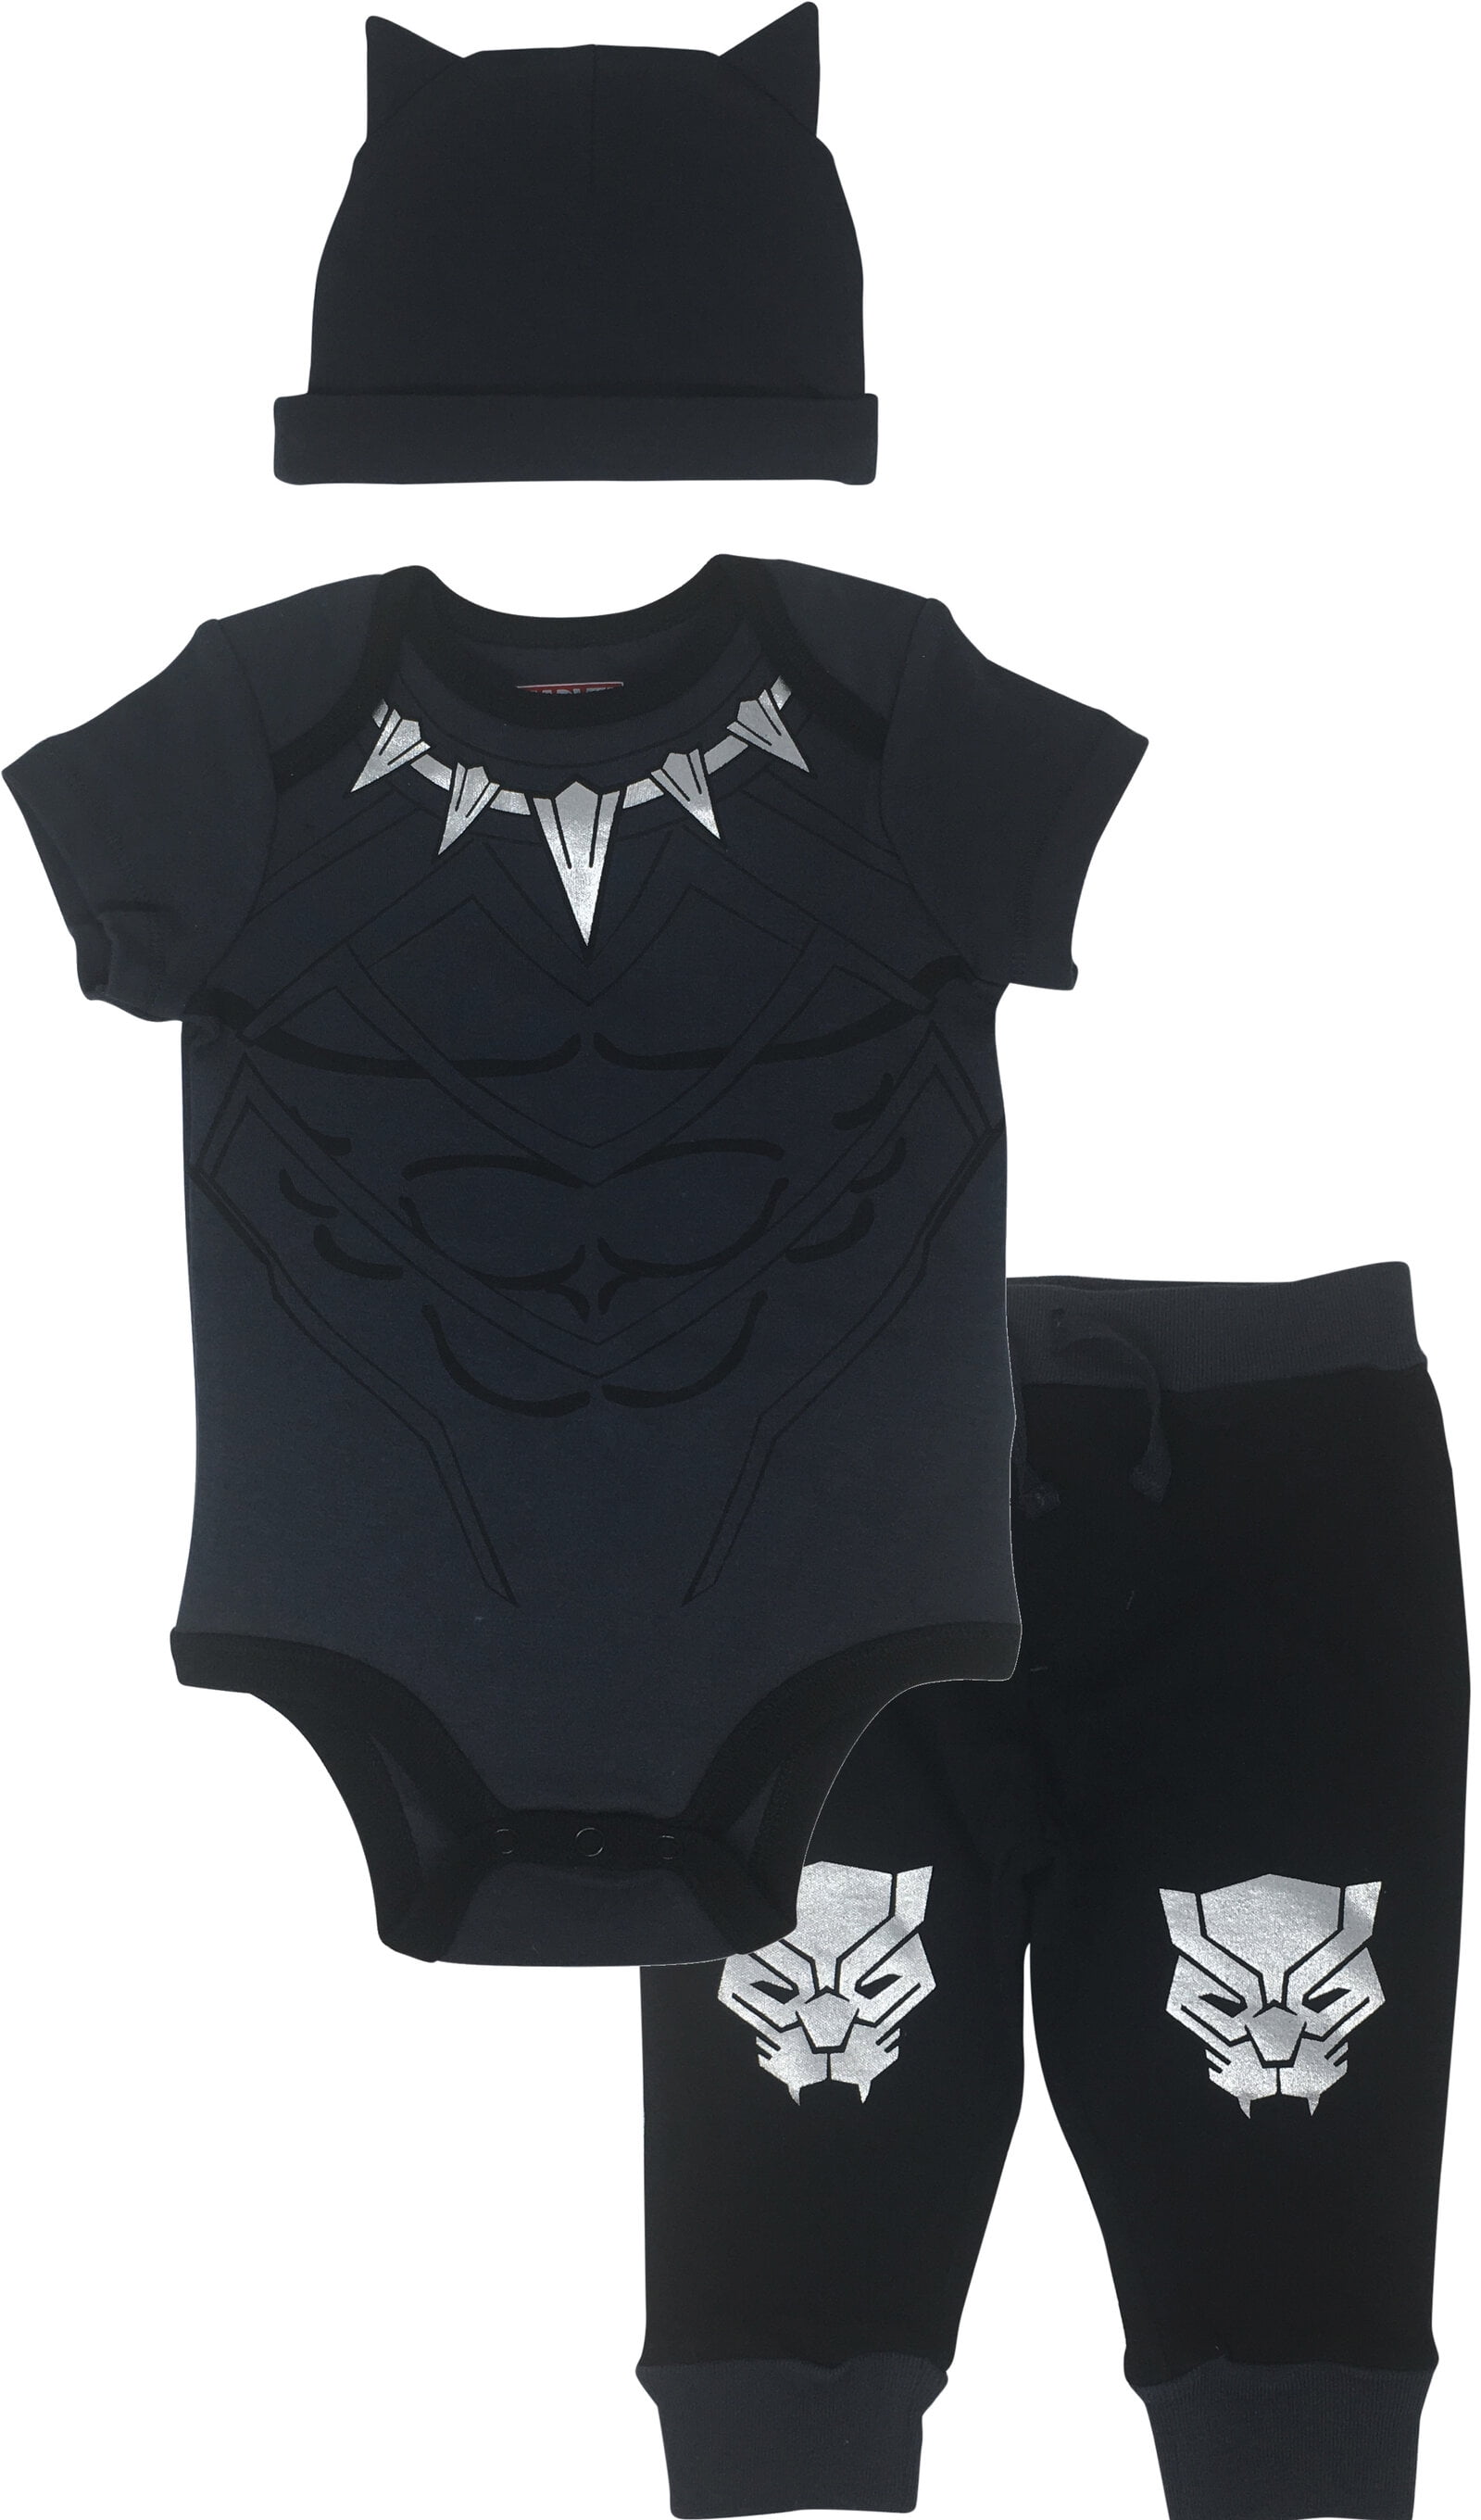 Marvel Avengers Black Panther Newborn Baby Boys Cosplay Bodysuit Pants and Hat 3 Piece Outfit Set 0-3 Months